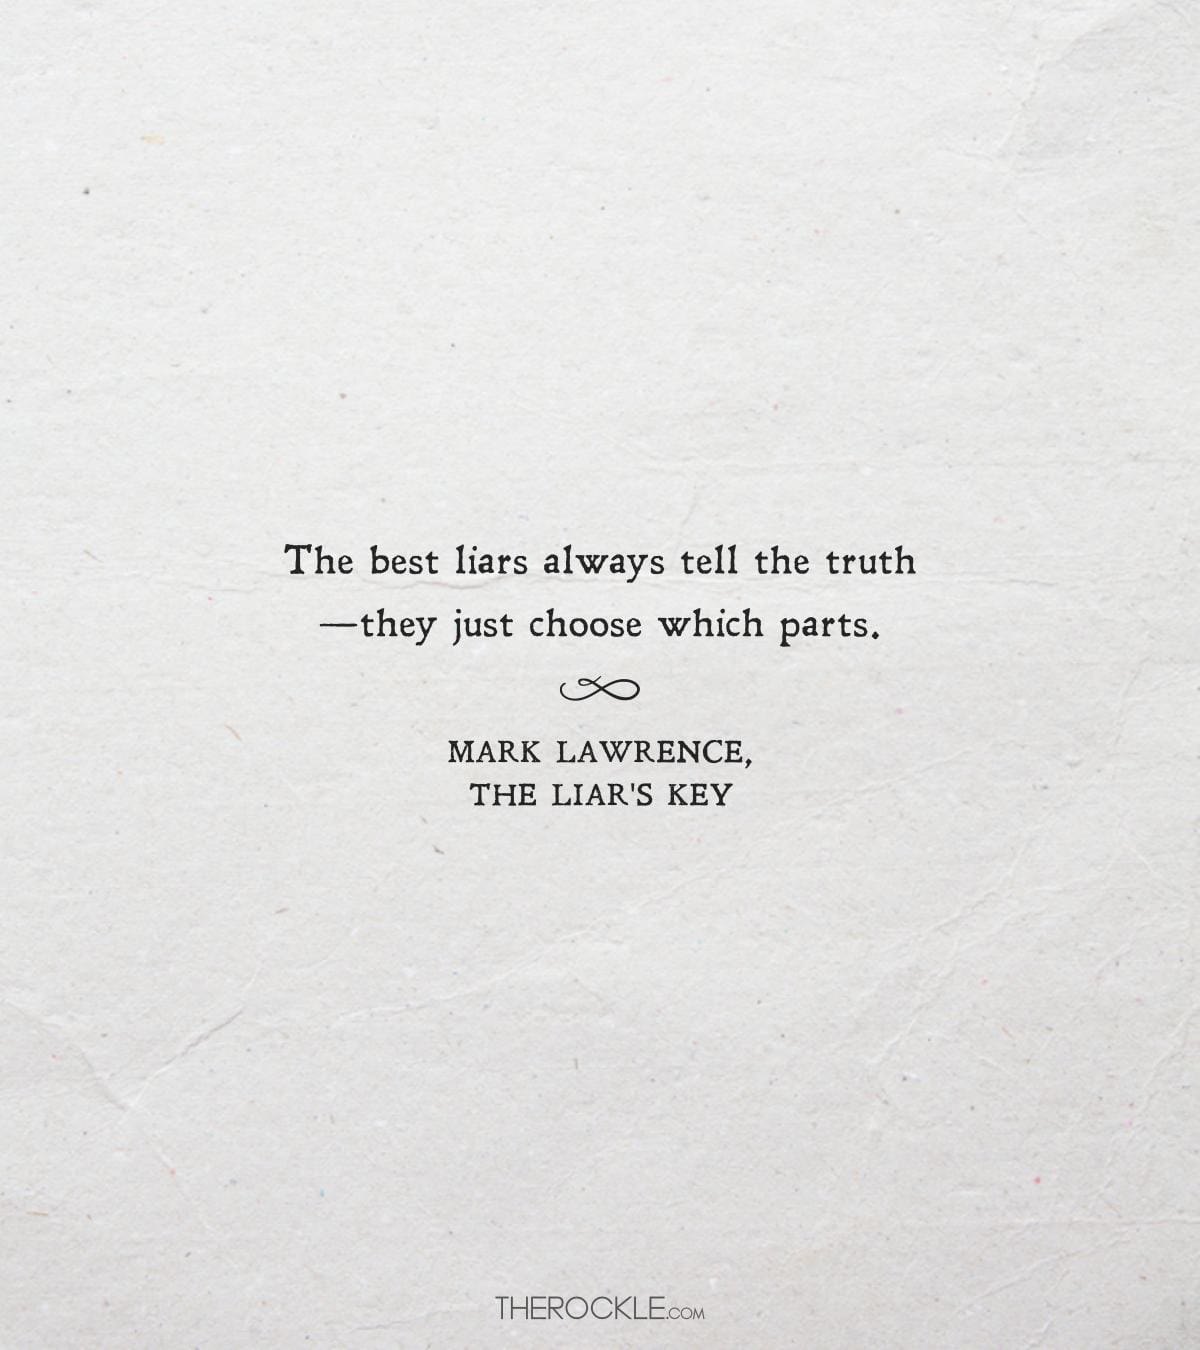 Mark Lawrence quote about liars